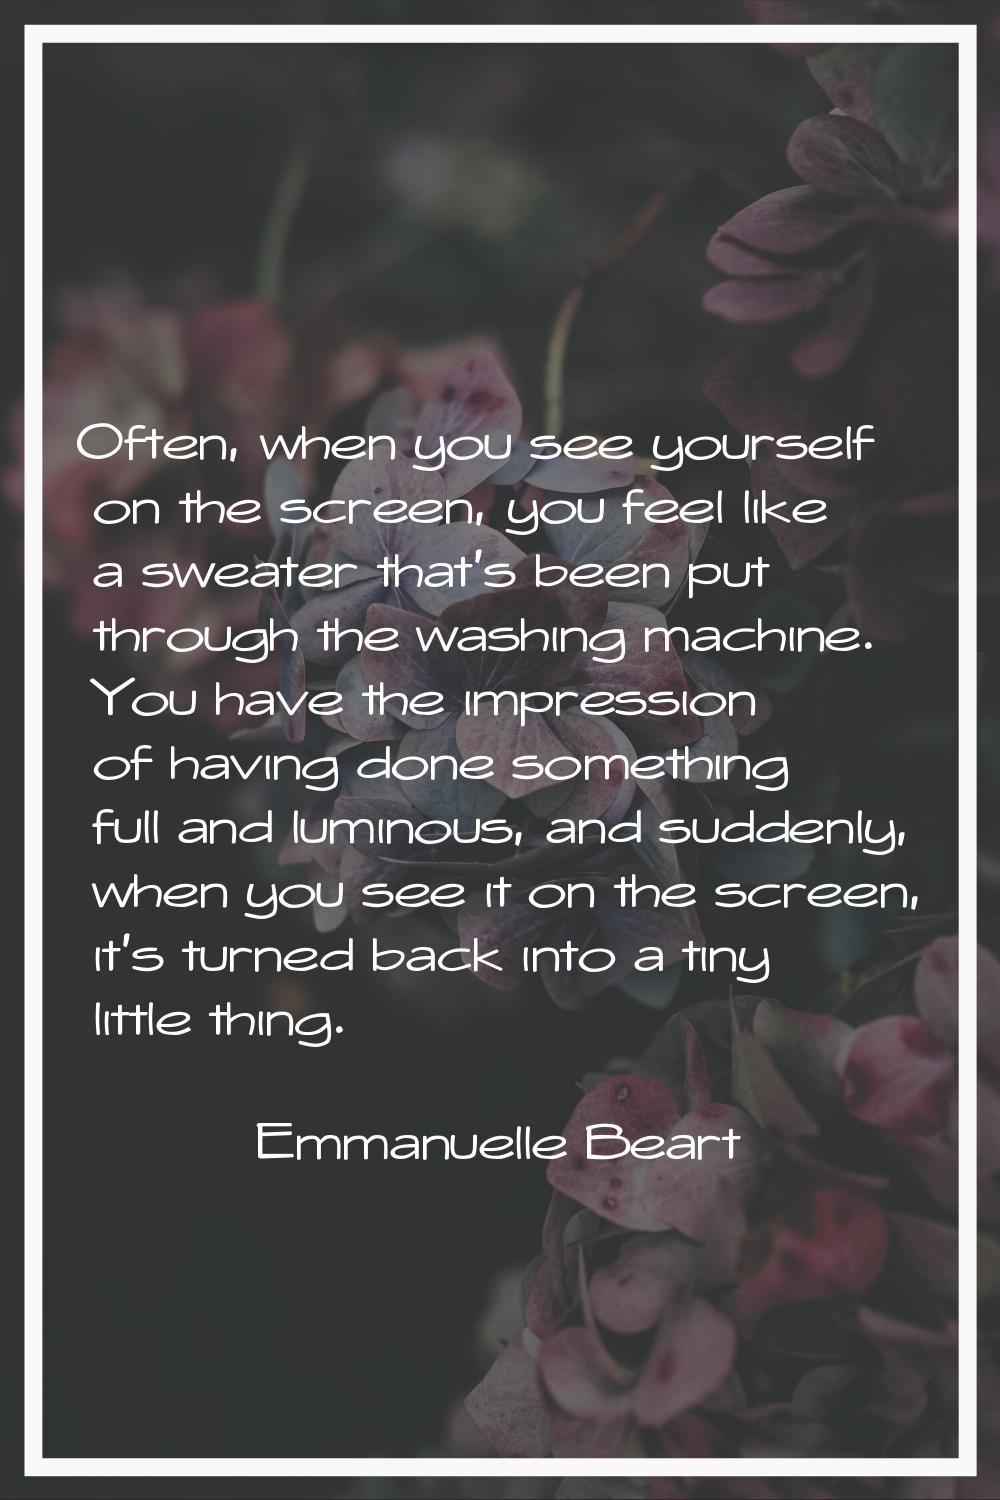 Often, when you see yourself on the screen, you feel like a sweater that's been put through the was